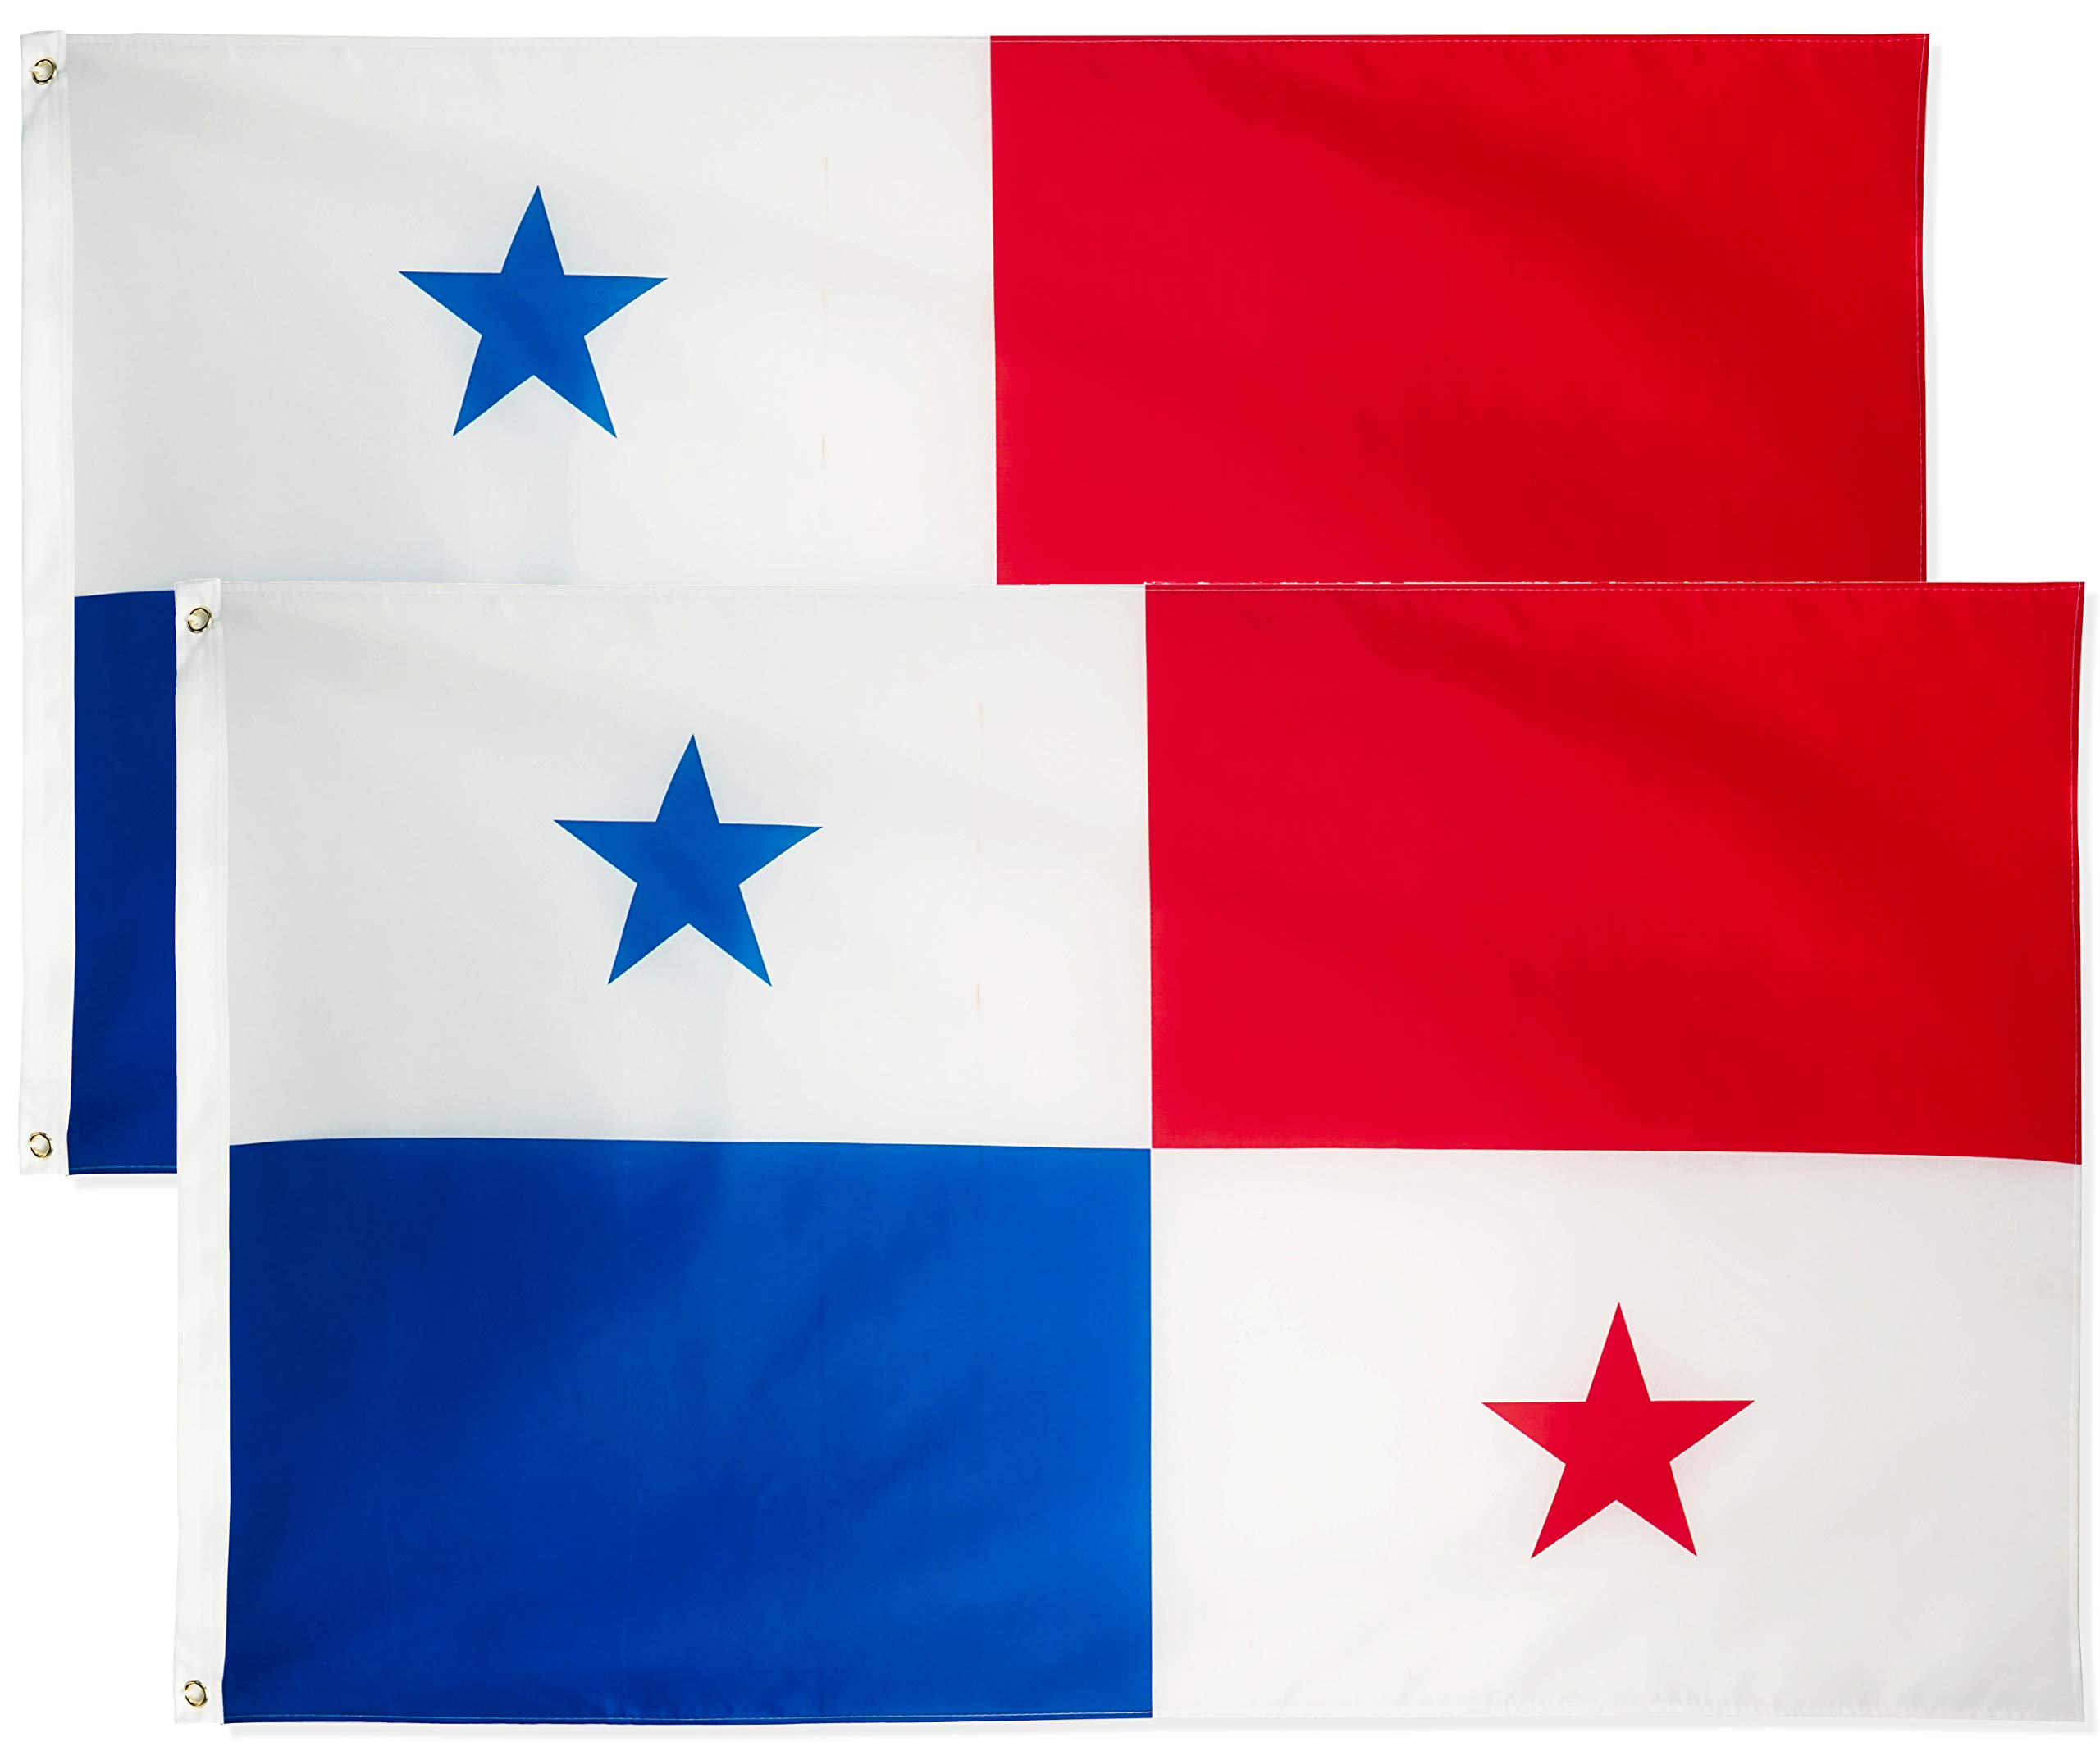 Danf pack panama flag x foot polyester panamanian national flags polyester with brass grommets x ft patio lawn garden